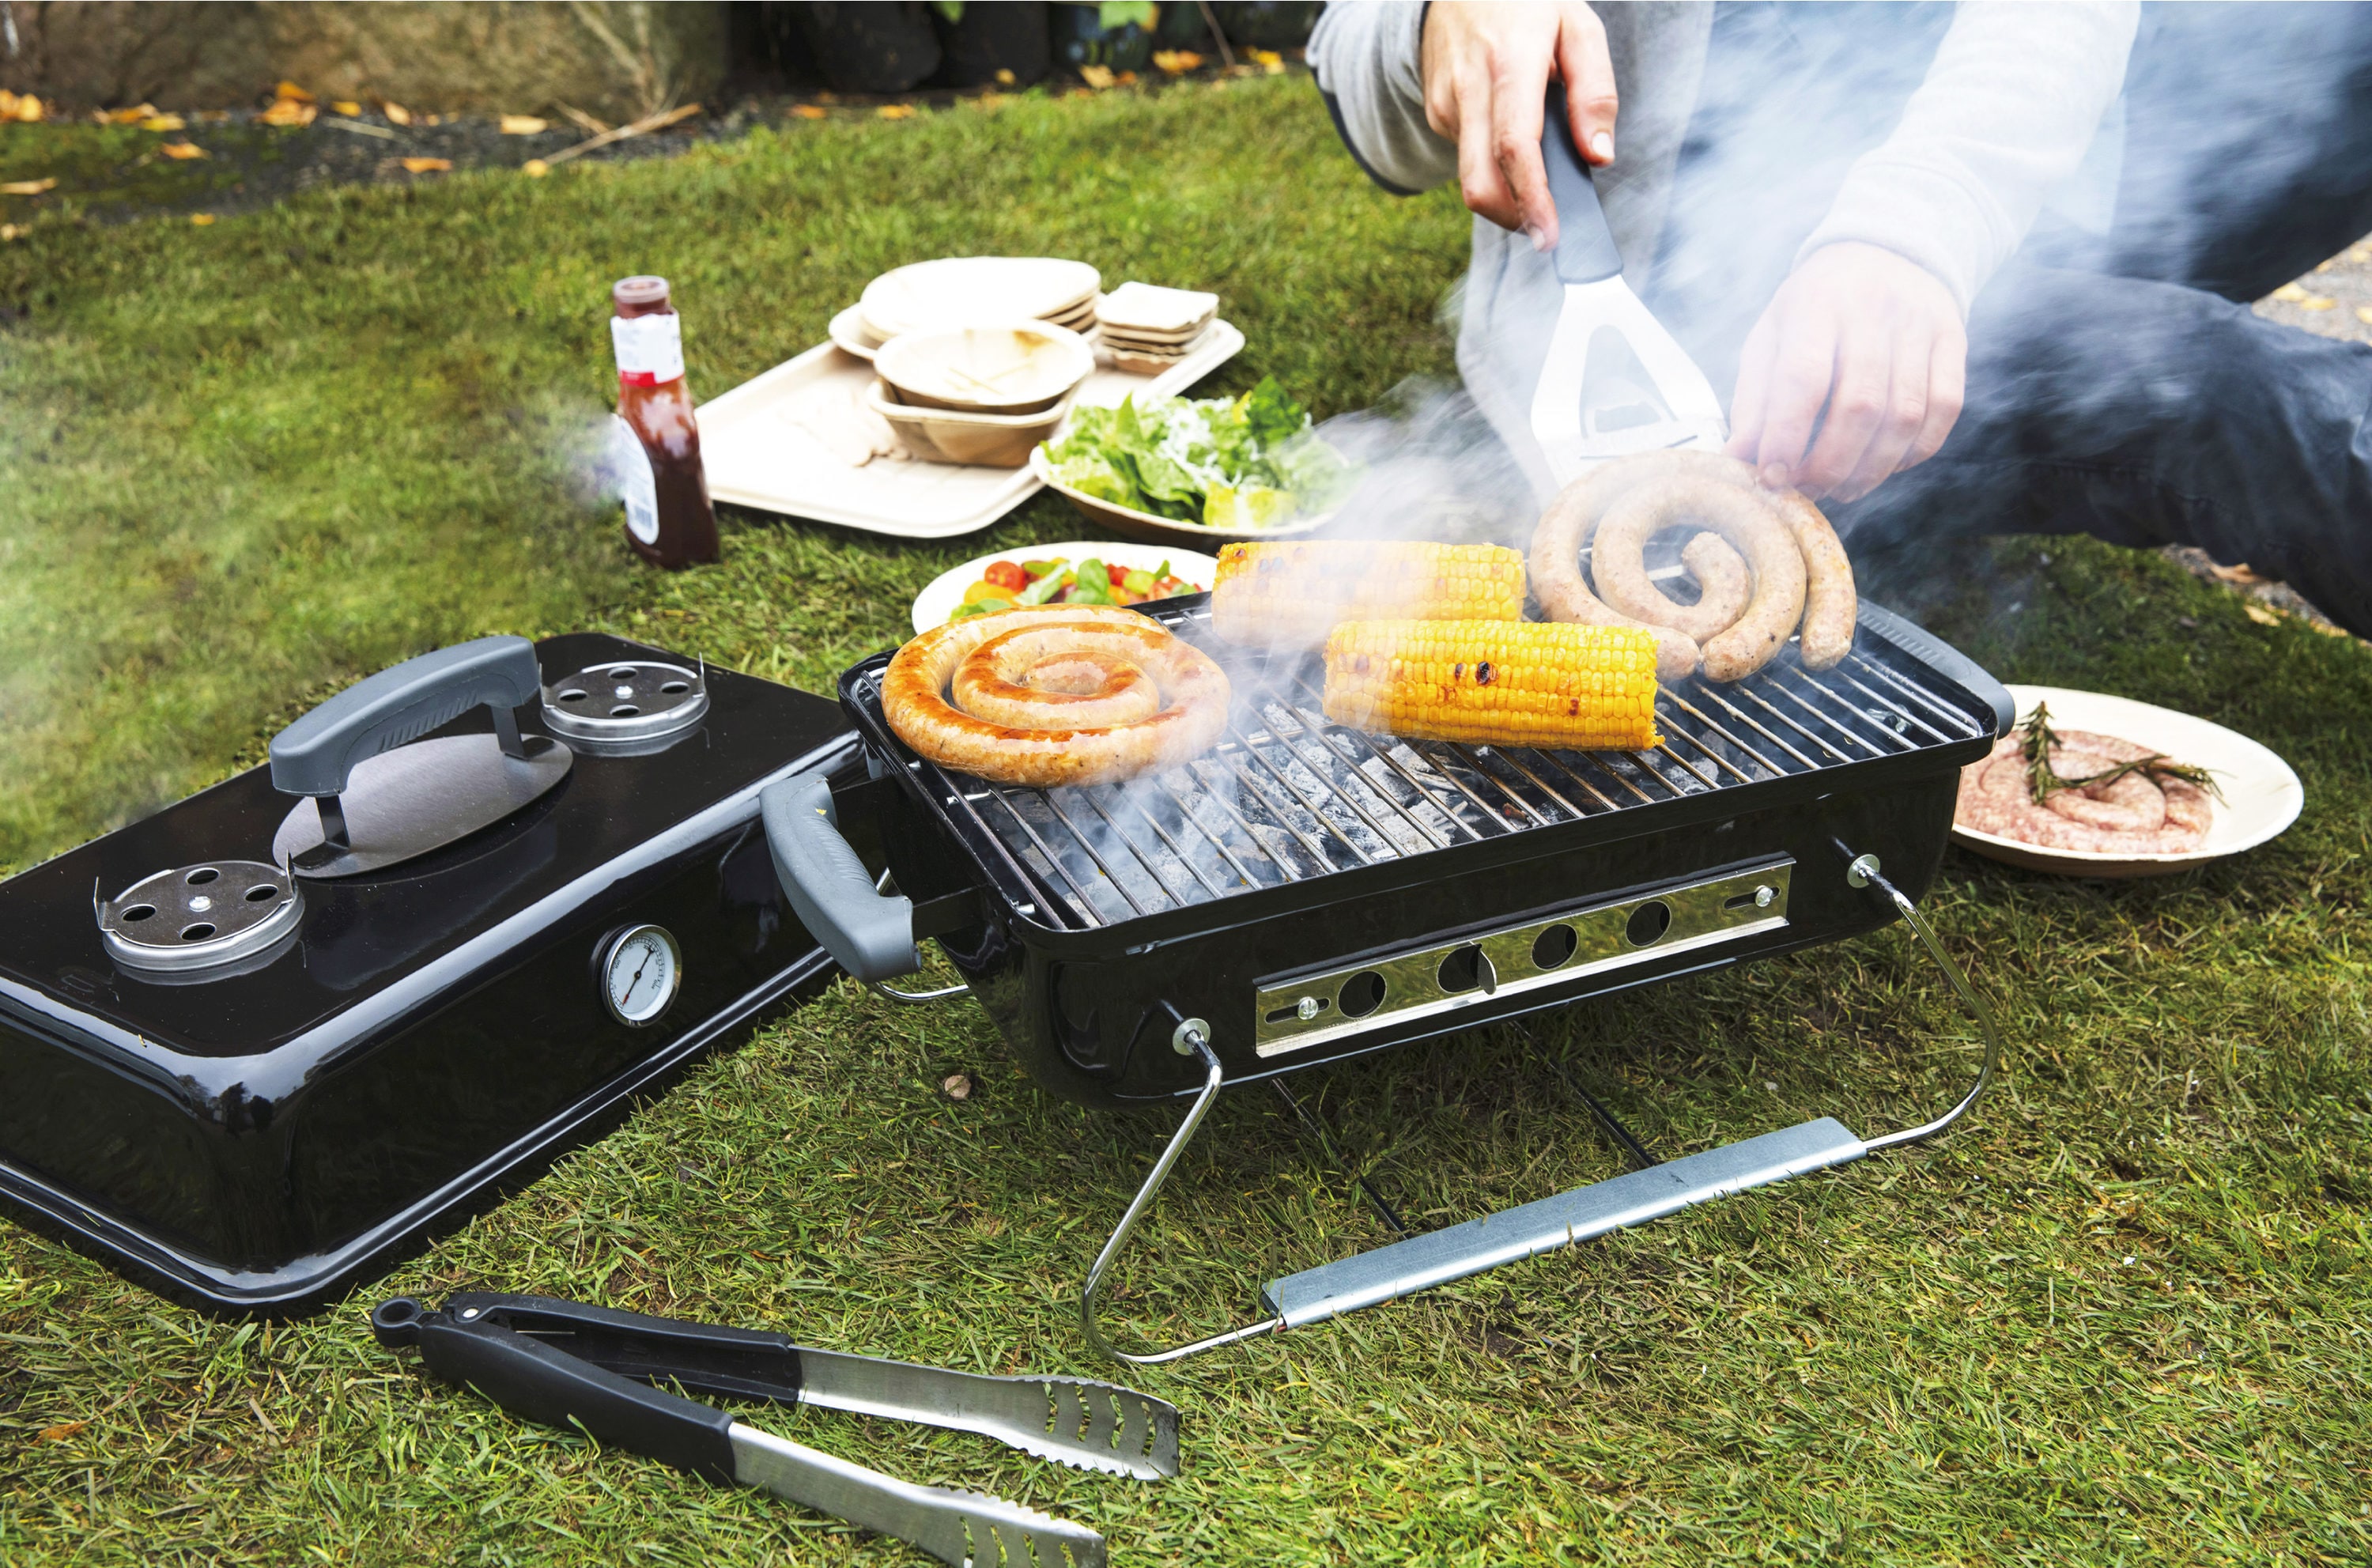 Portable Cast Iron Charcoal Grills - BBQ Grill for Picnic